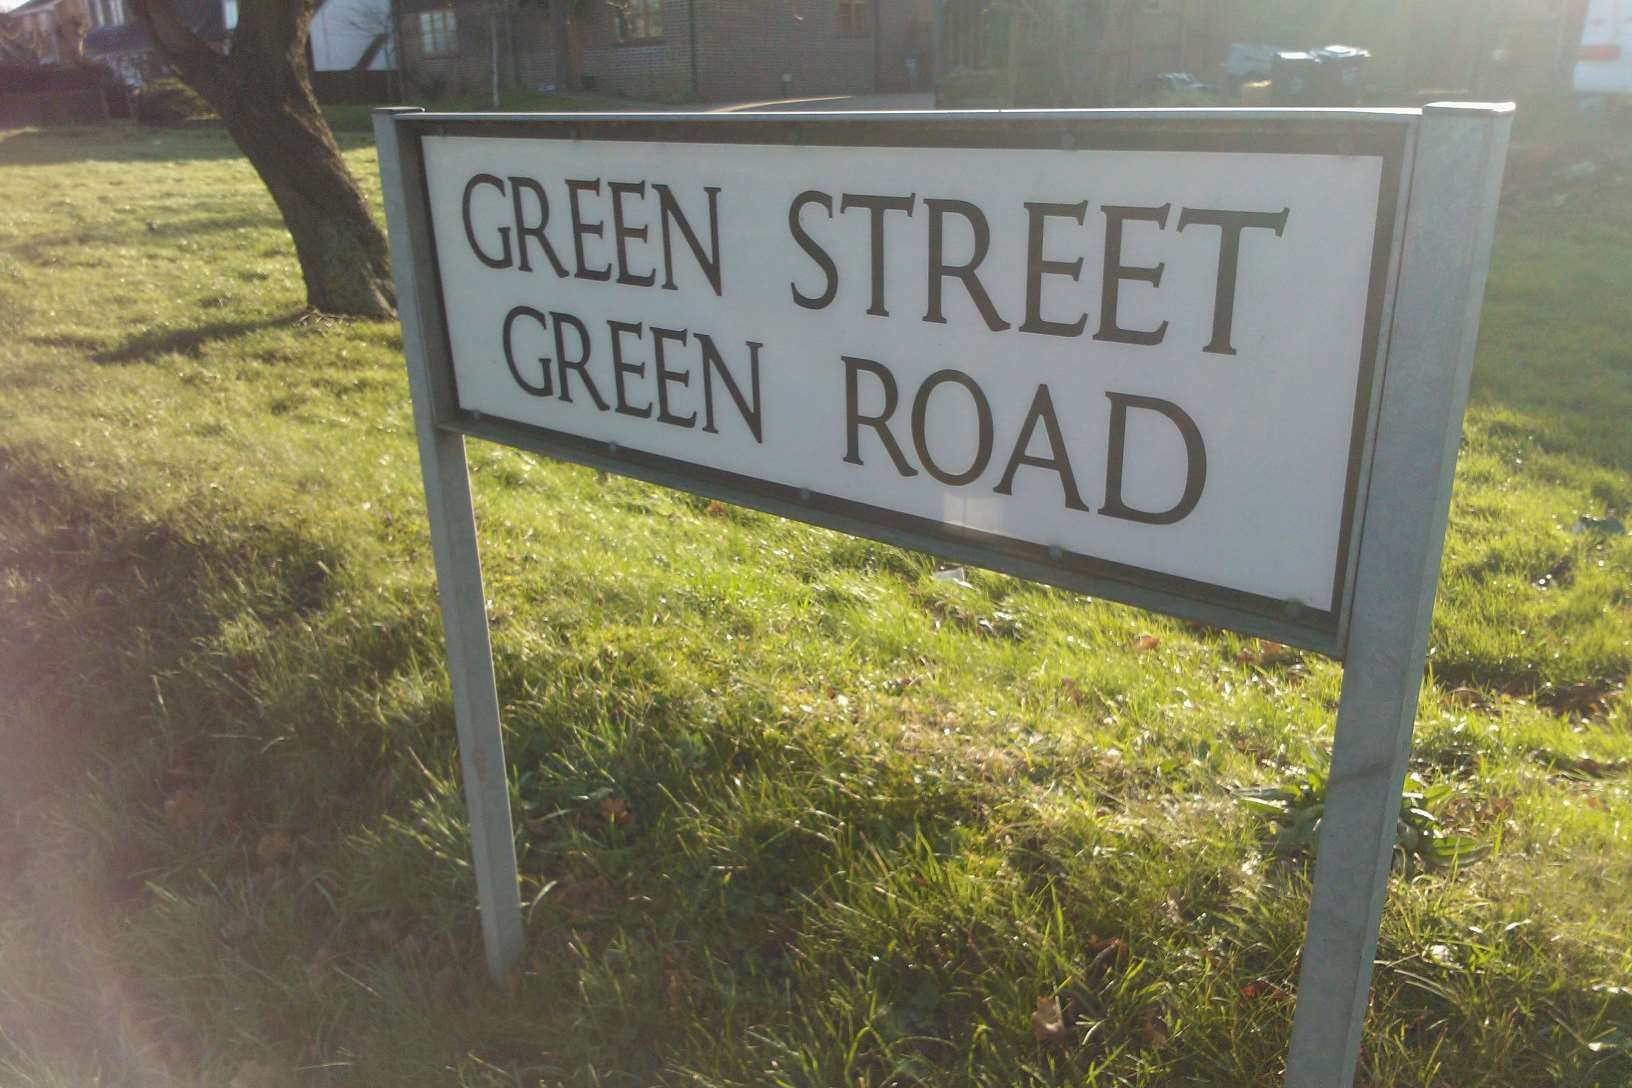 Green Street Green Road - the road where the alleged assault took place